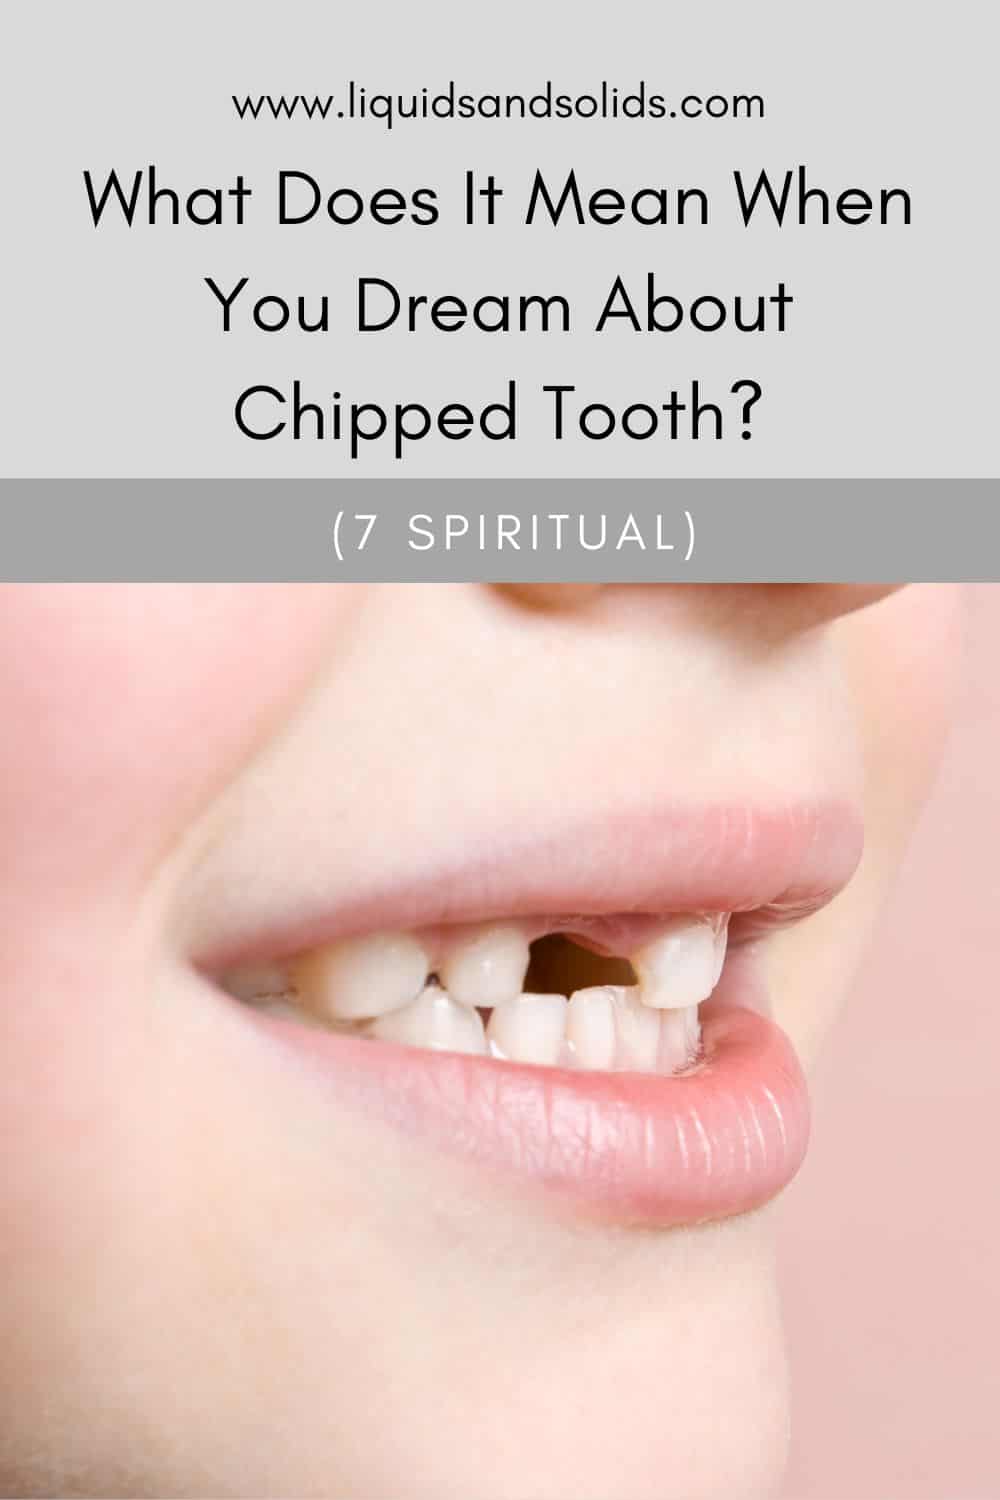 chipped tooth dream meaning